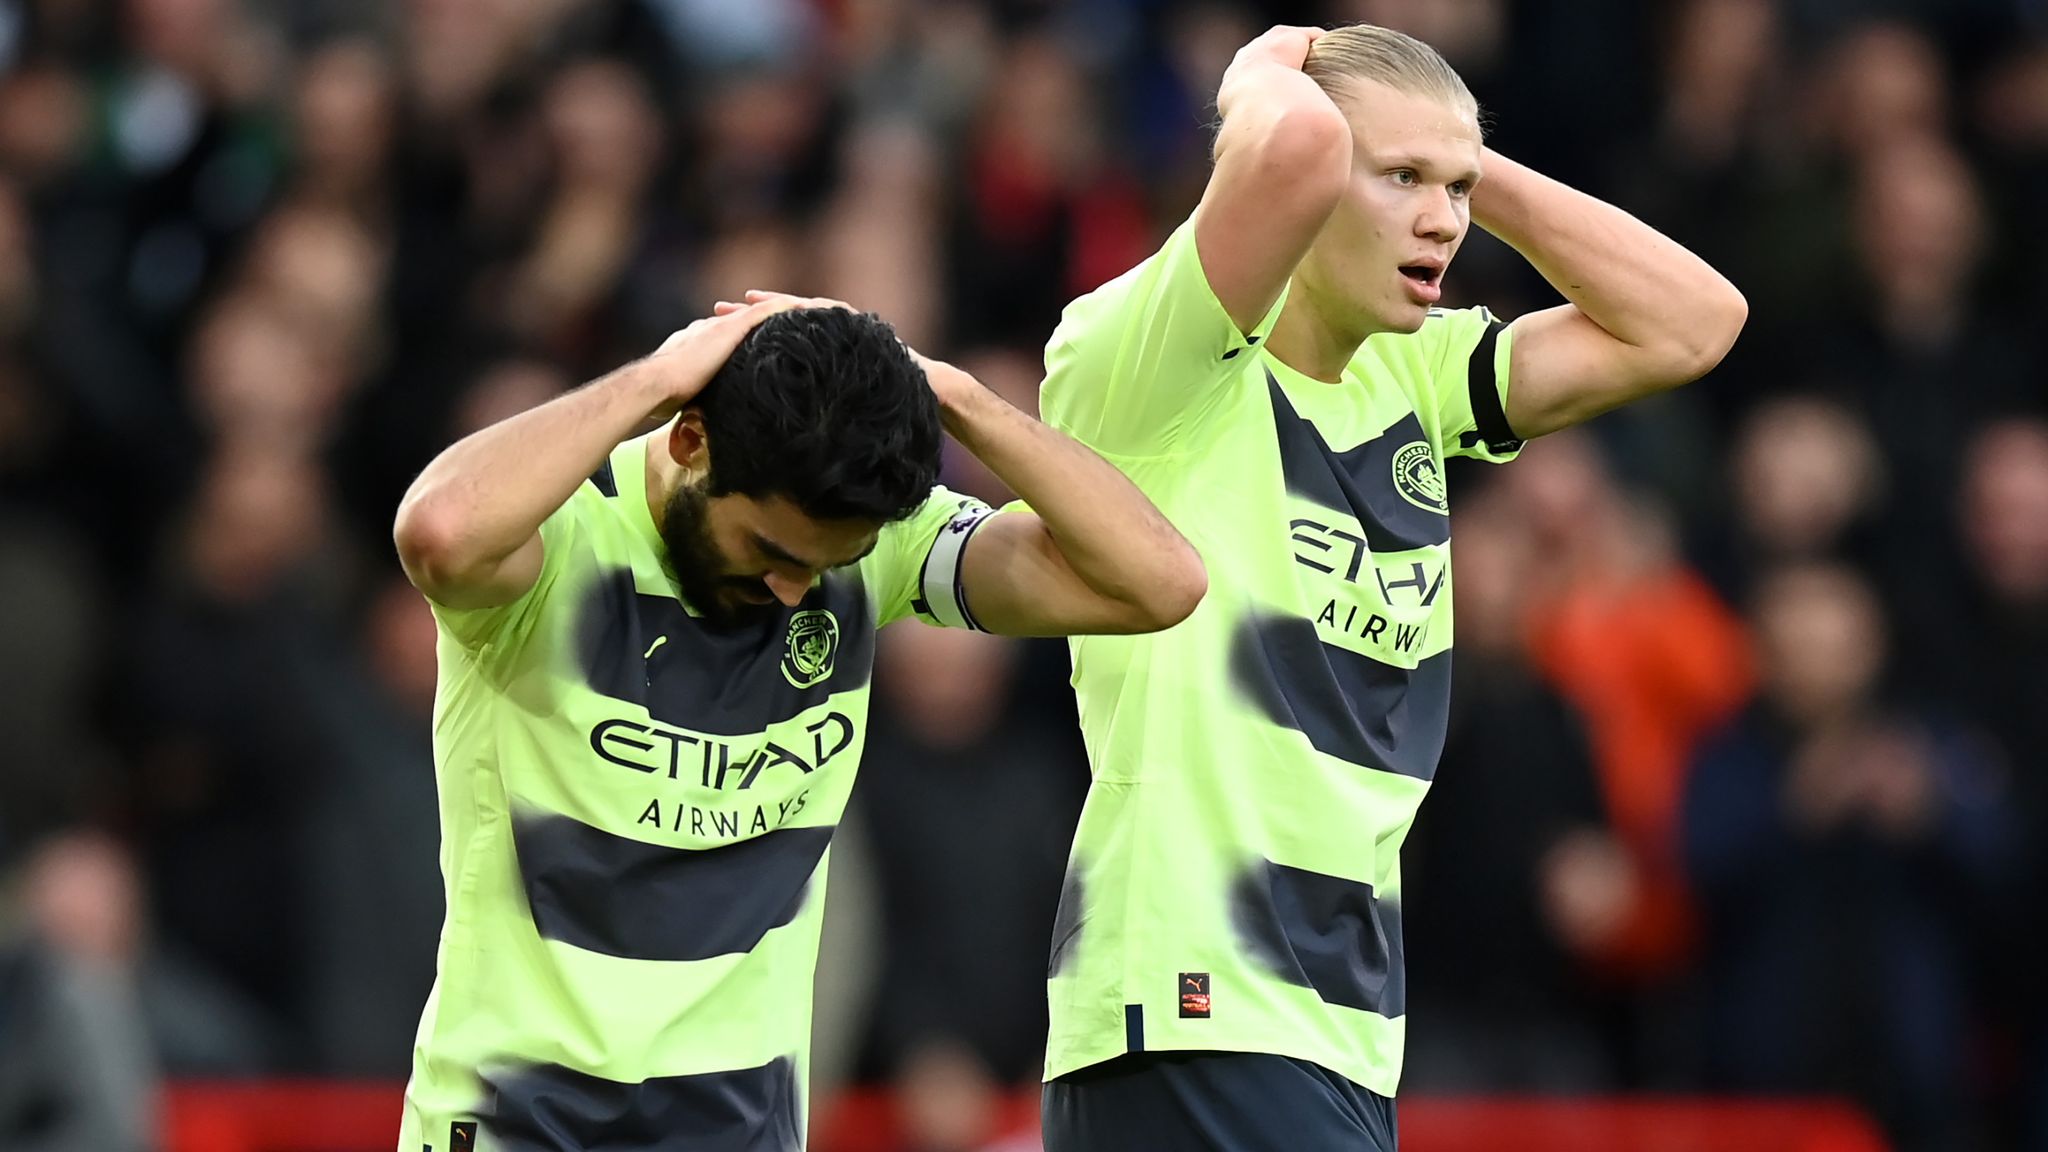 Wasteful Manchester City drop points again in latest title race twist